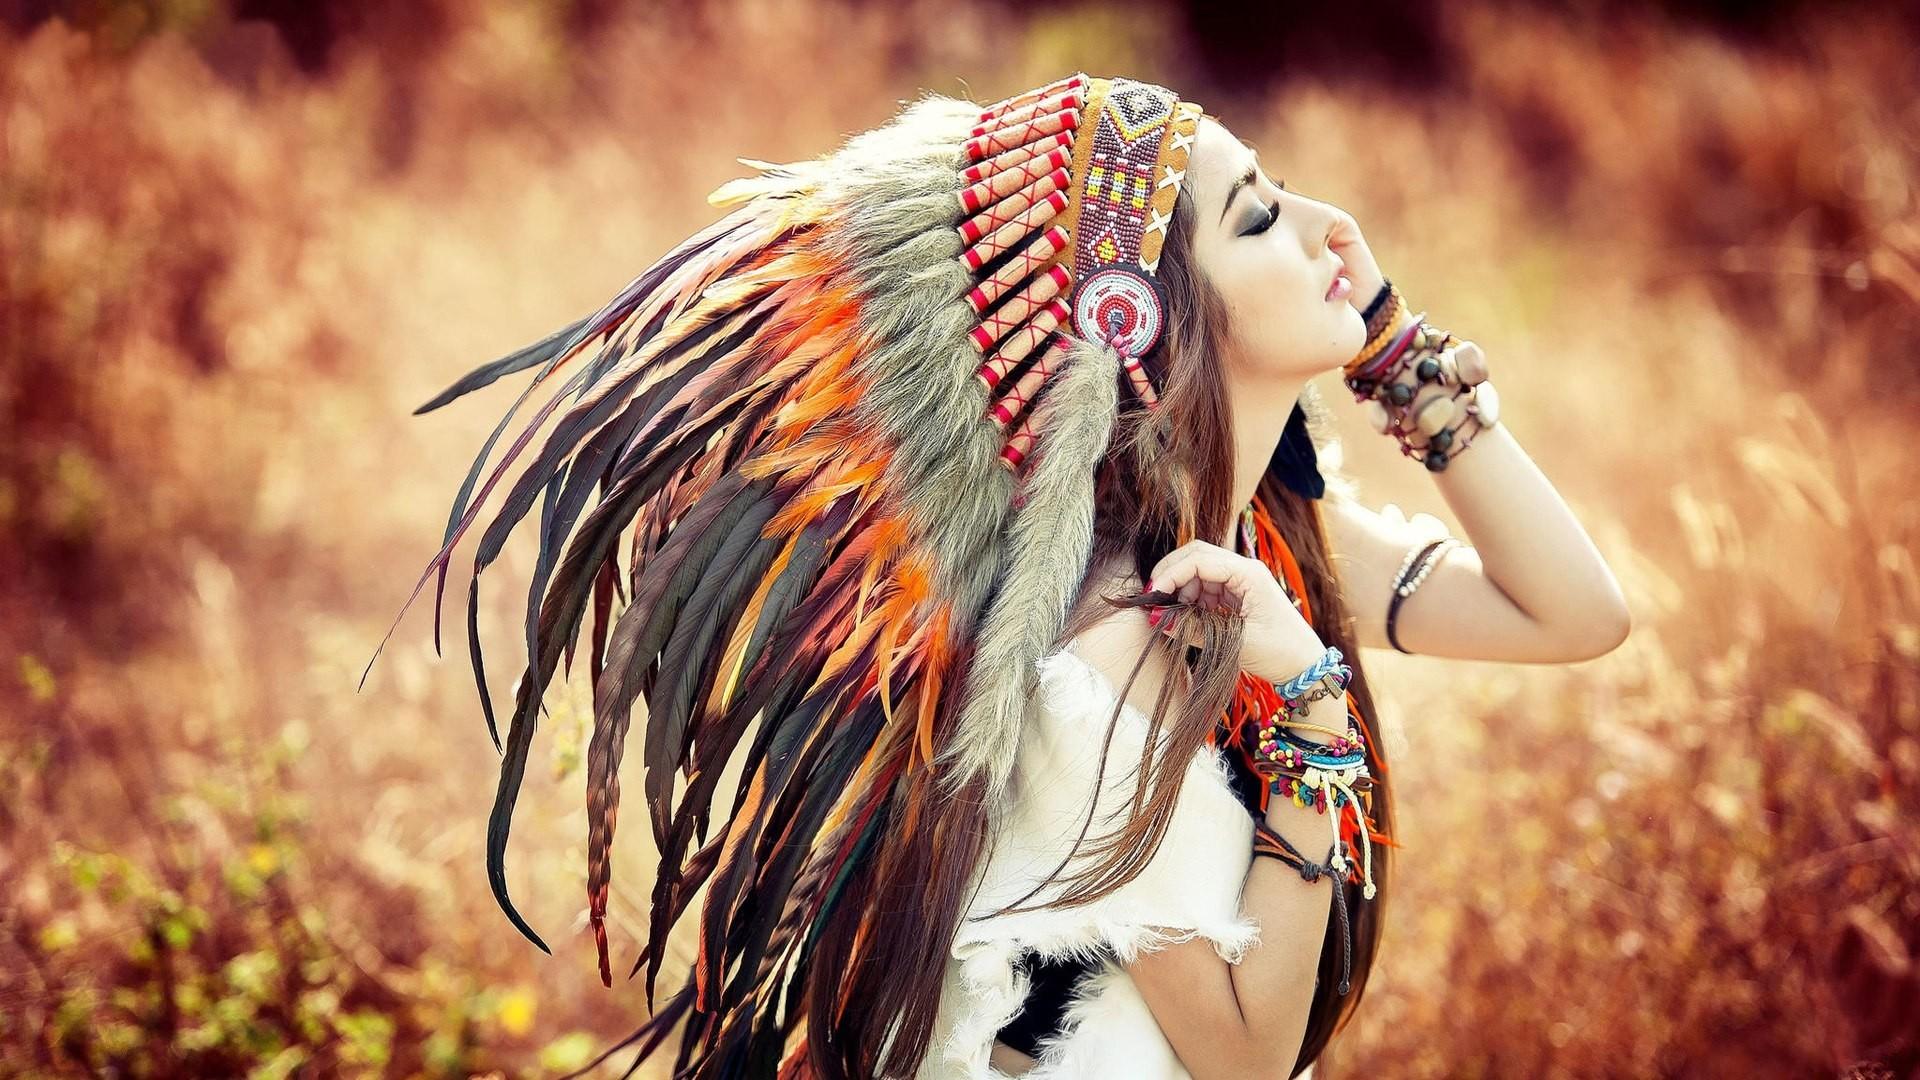 brunette, feathers, asian, headdress, closed eyes, Native Americans